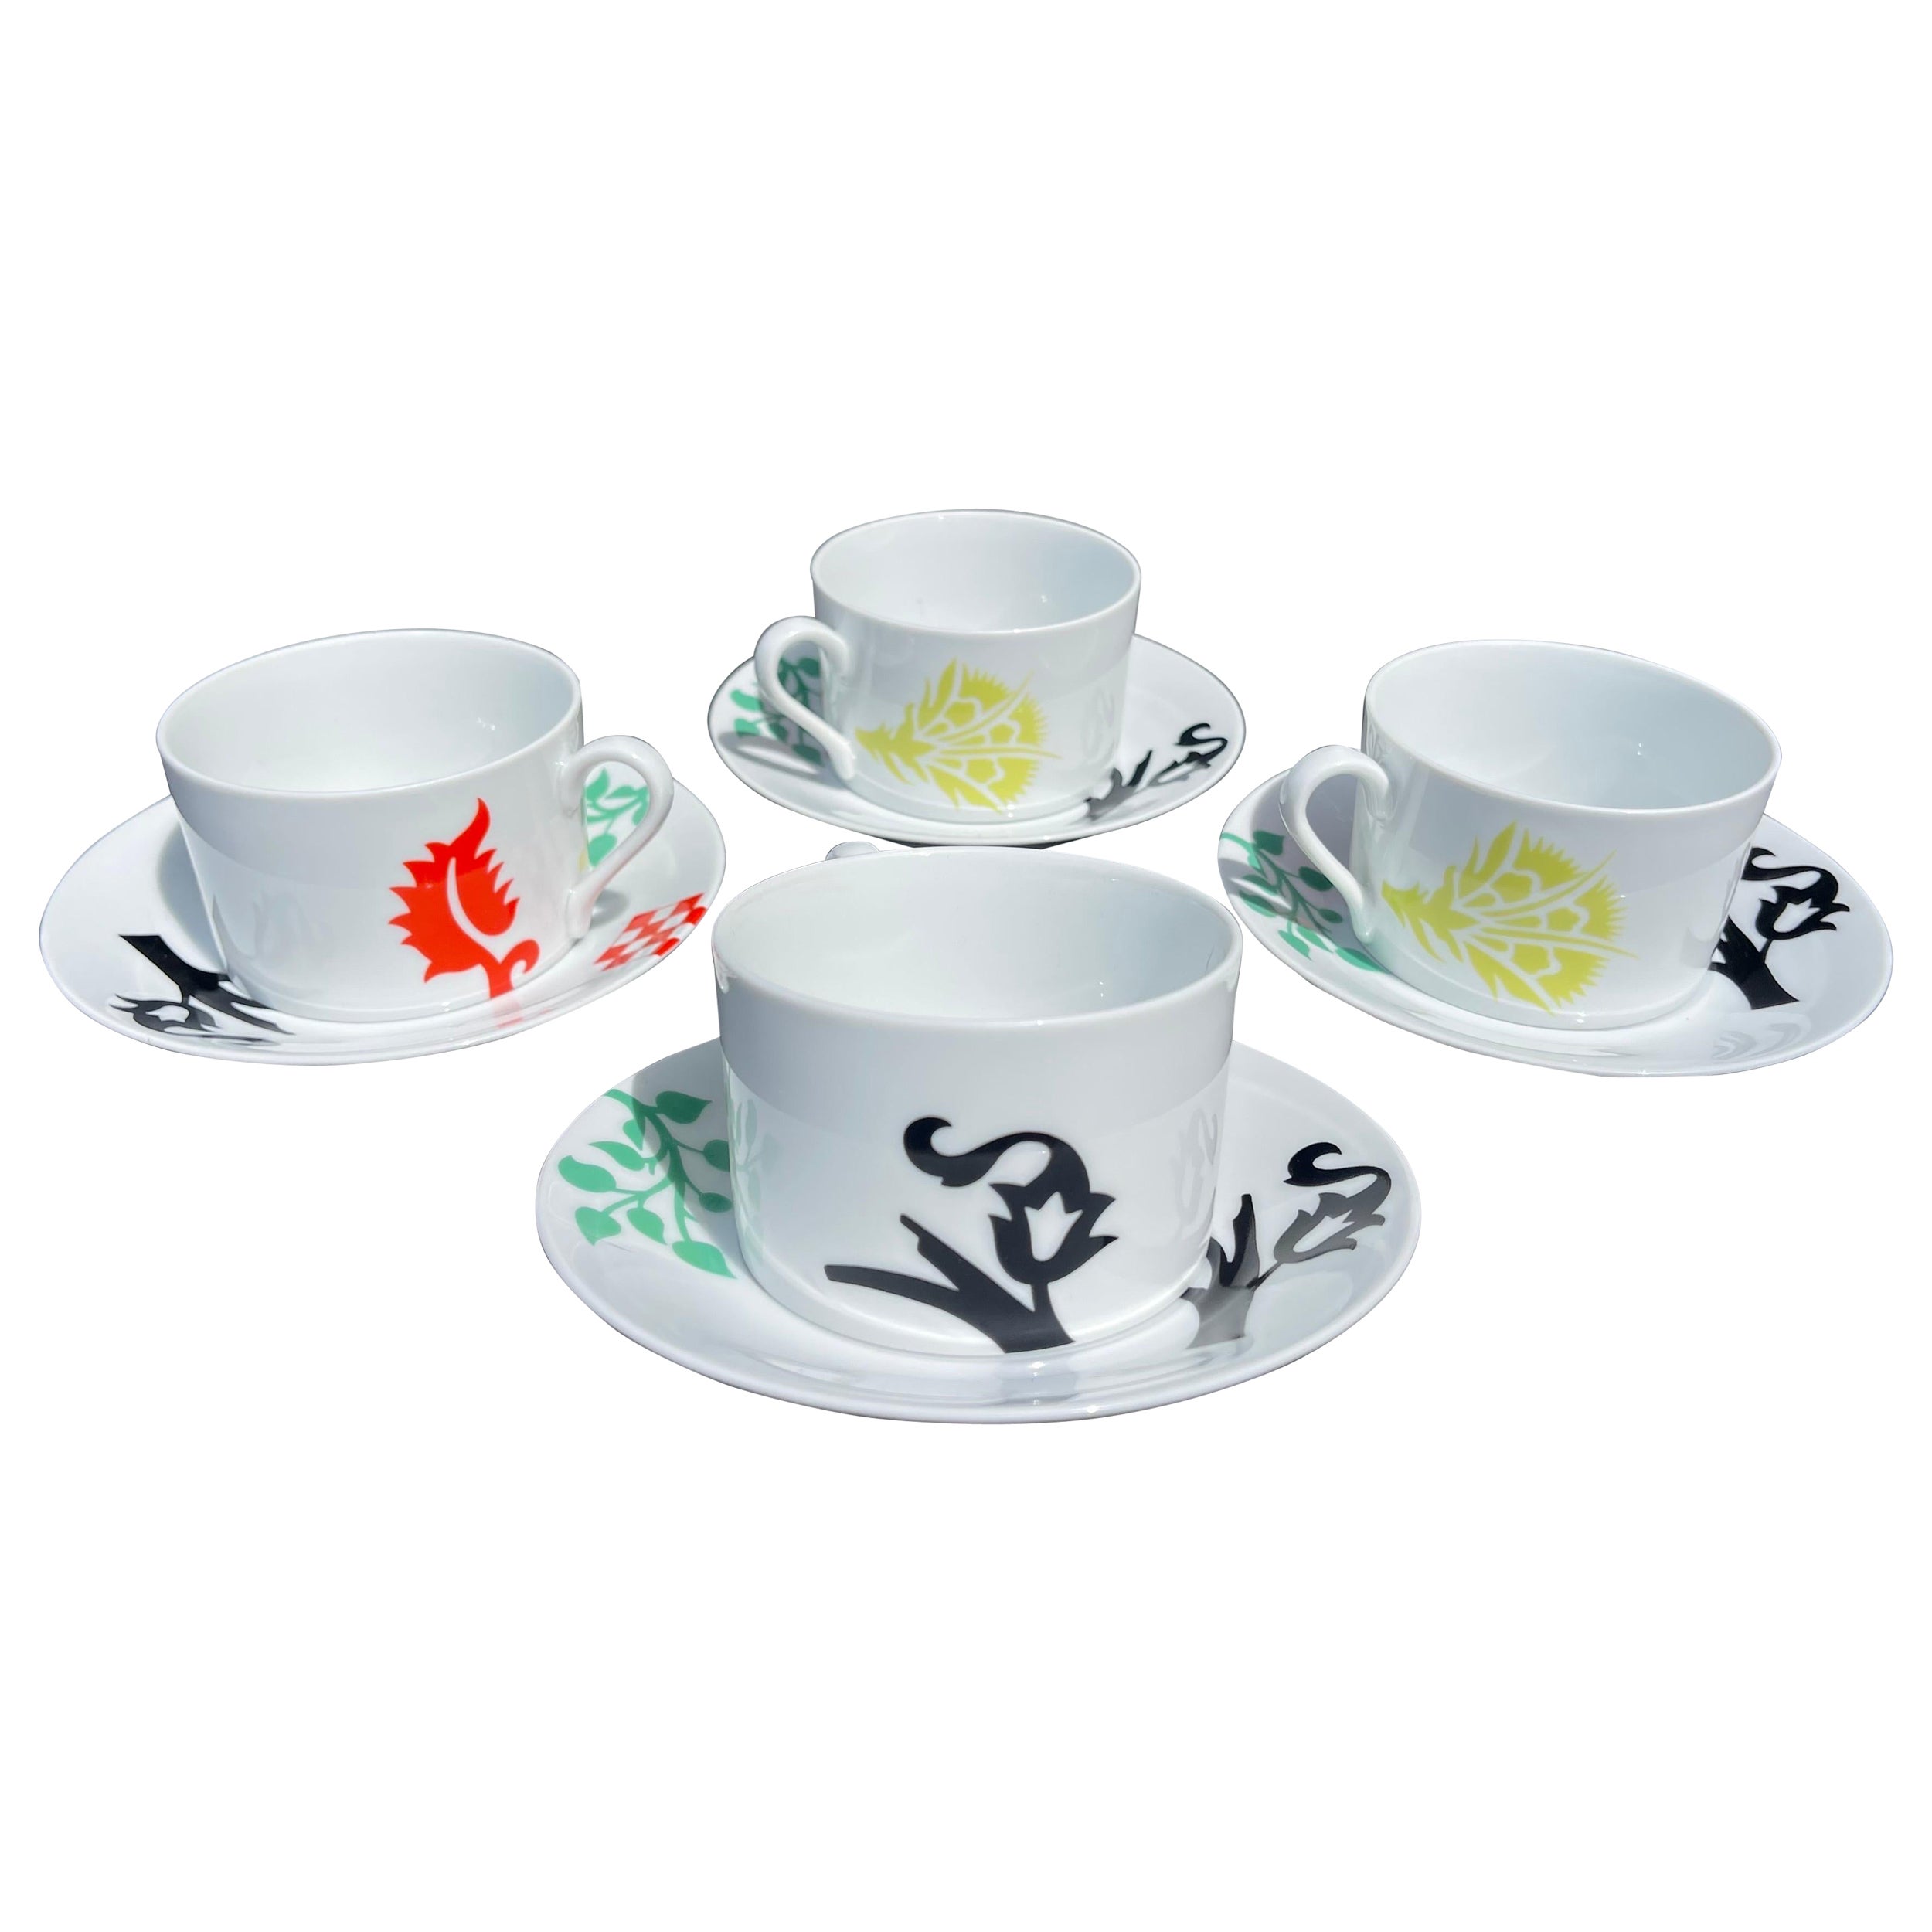 Ettore Sottsass for Swid Powell “Renaissance” Cup & Saucer, Set of 4 For Sale